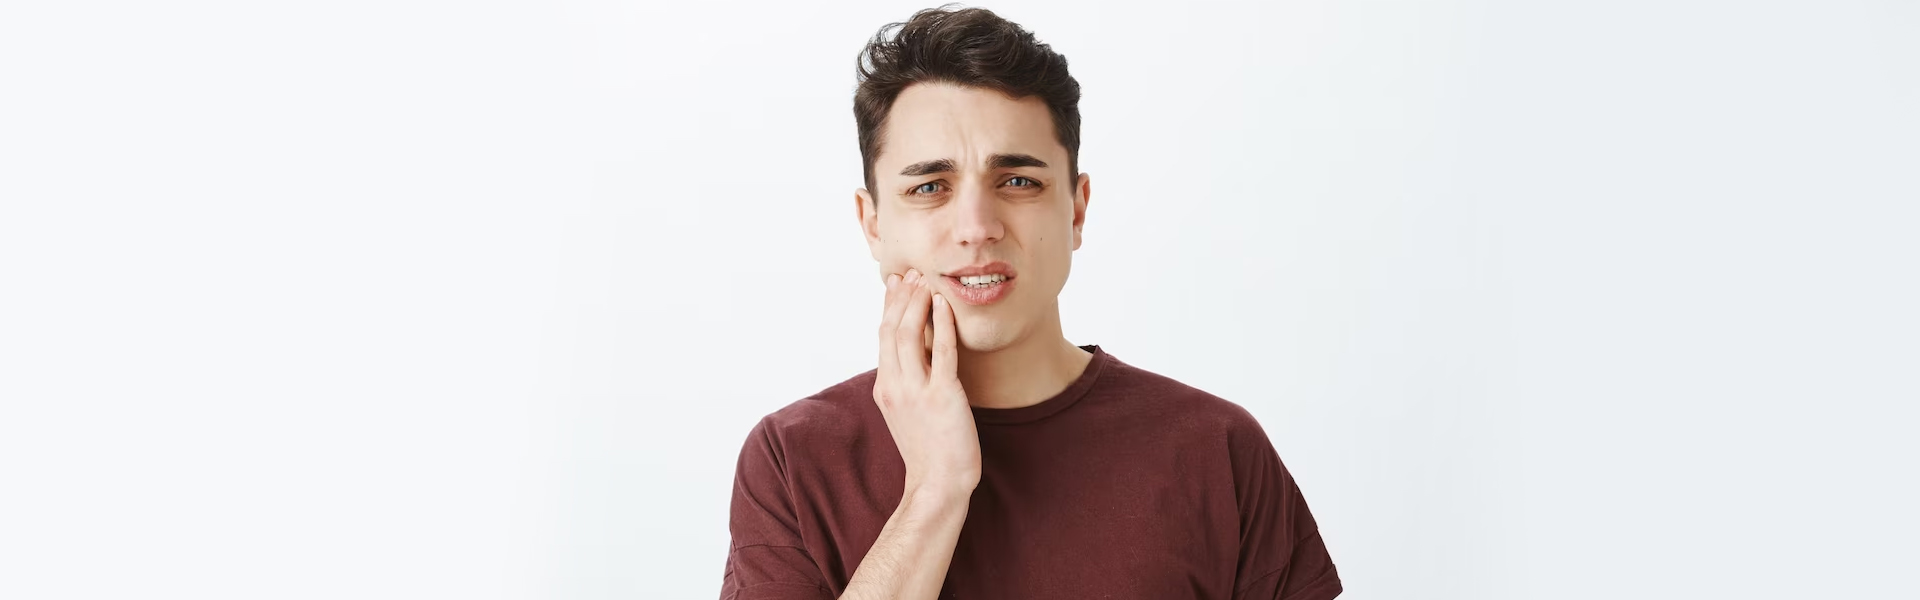 Cavity Control: Can a Cavity Go Away With Brushing?